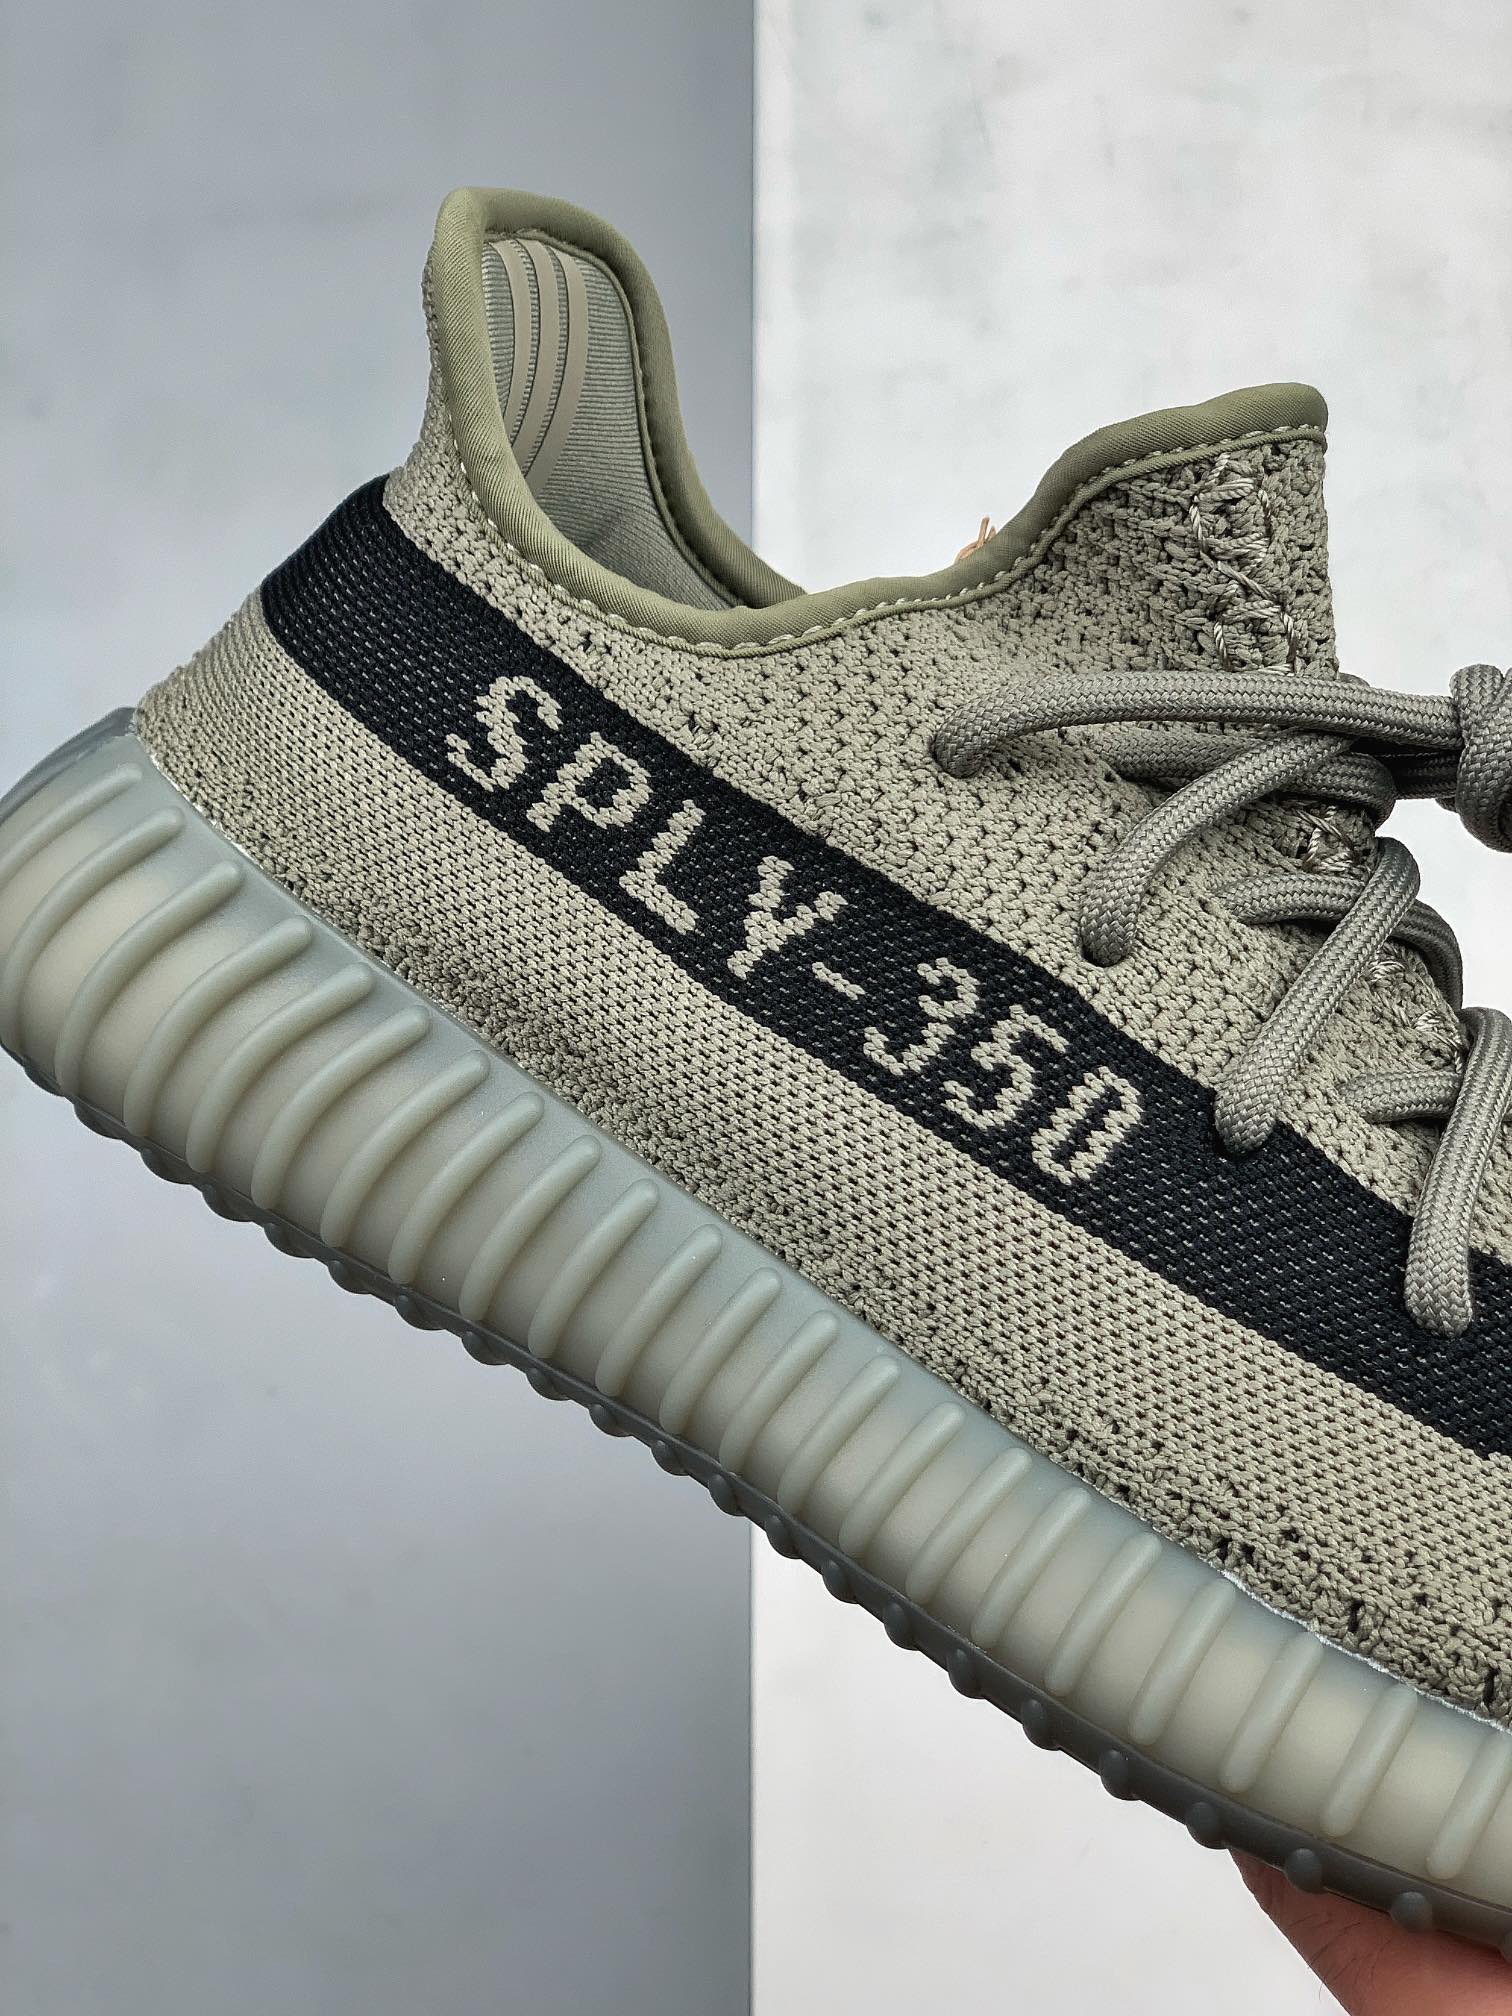 Adidas Yeezy Boost 350 V2 Granite HQ2059 - Stylish and Comfortable Footwear